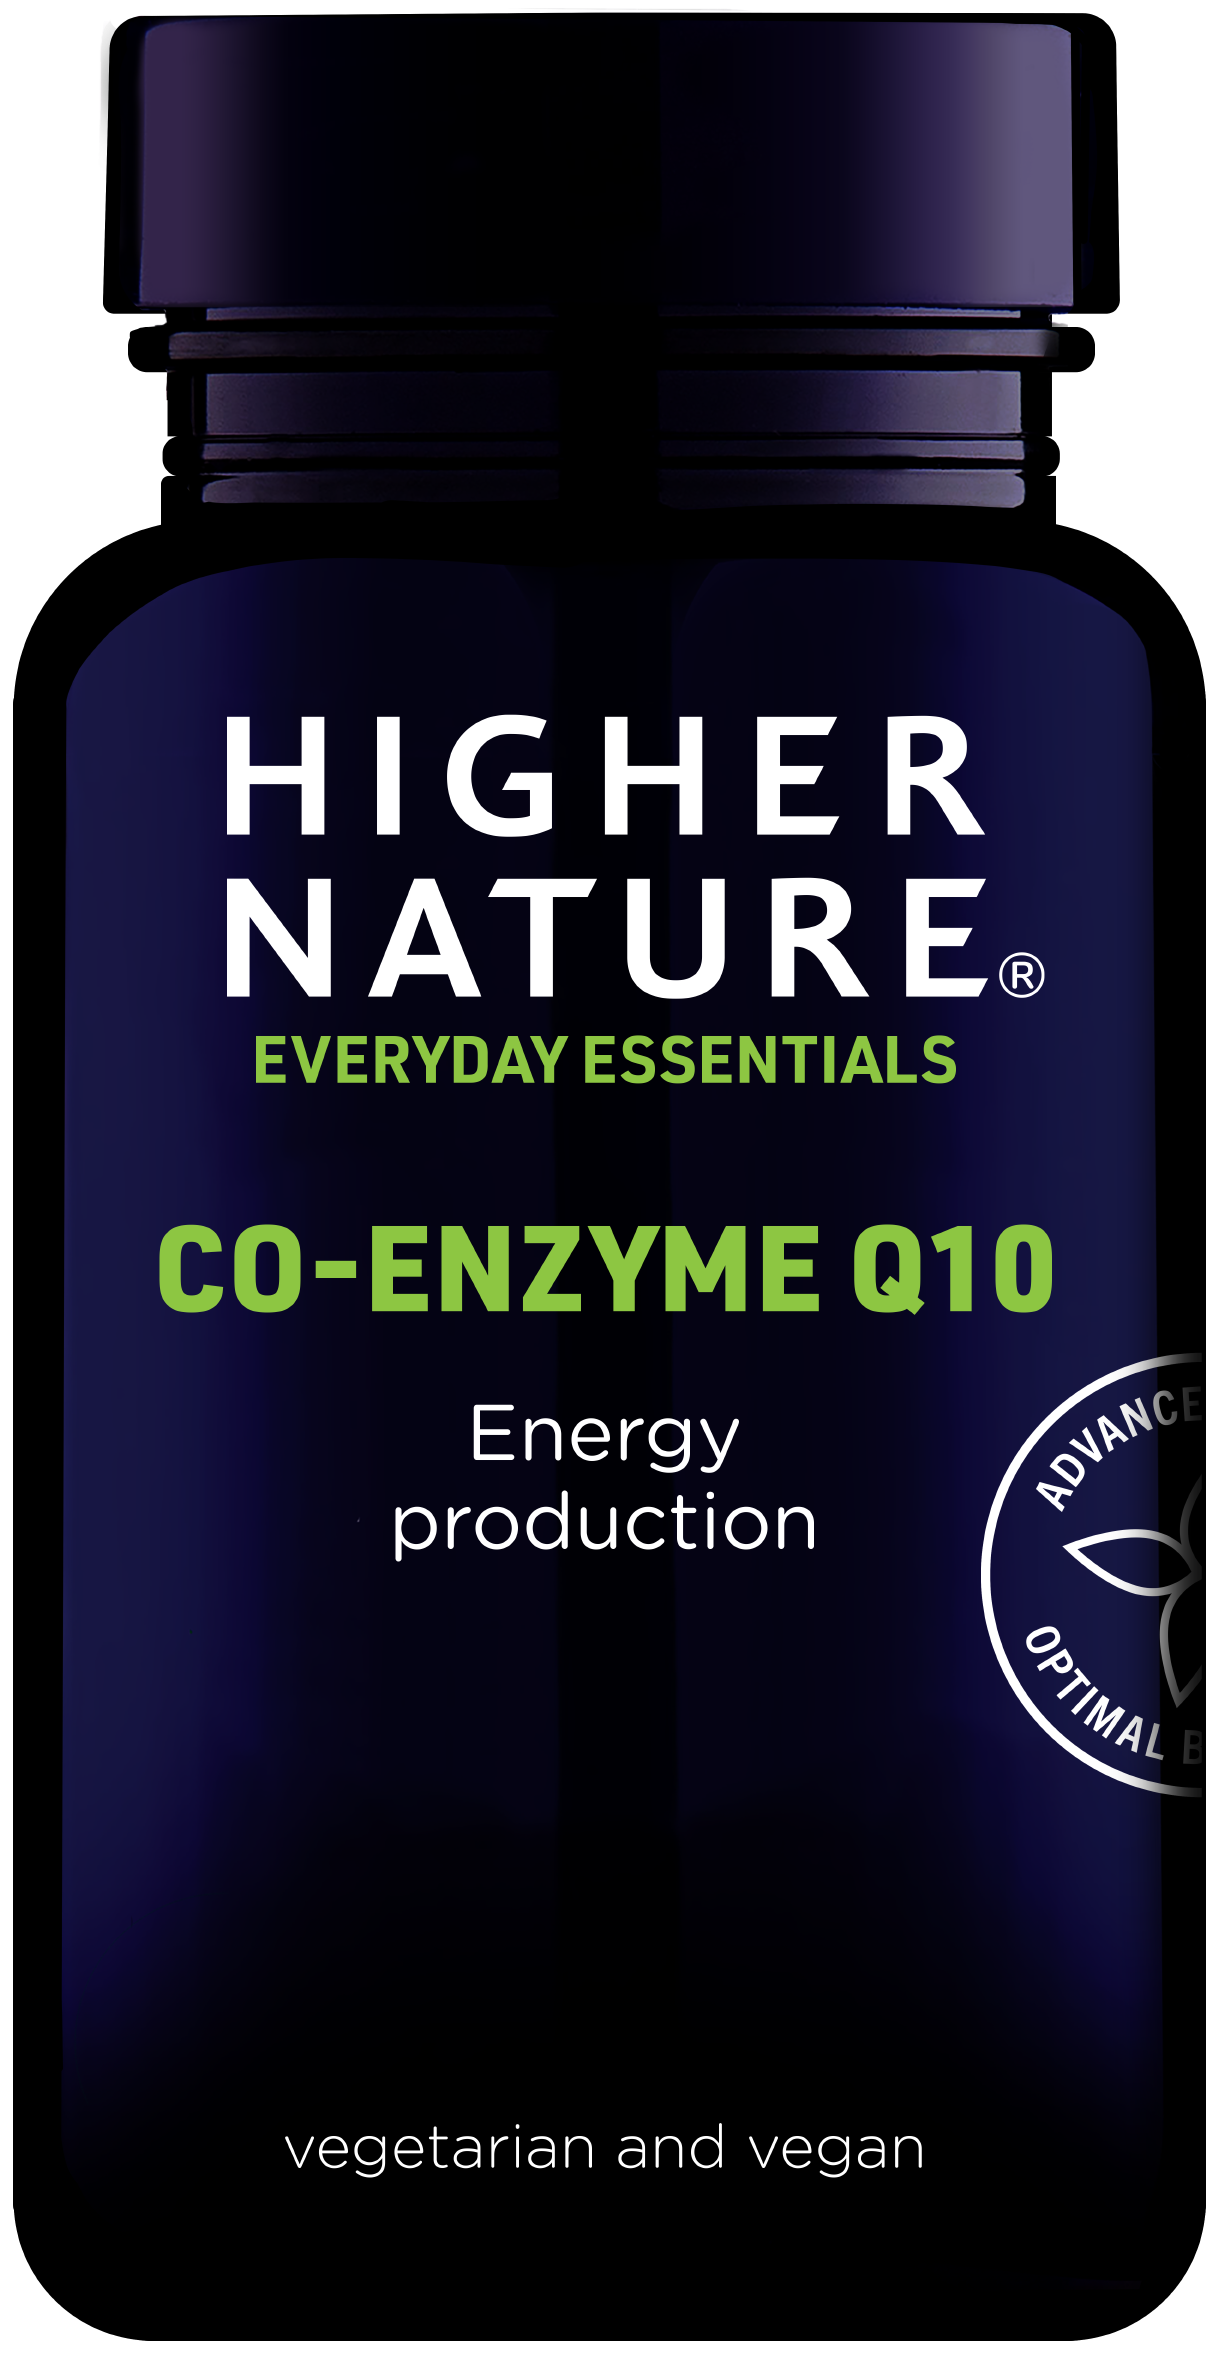 Higher Nature Co-Enzyme Q10